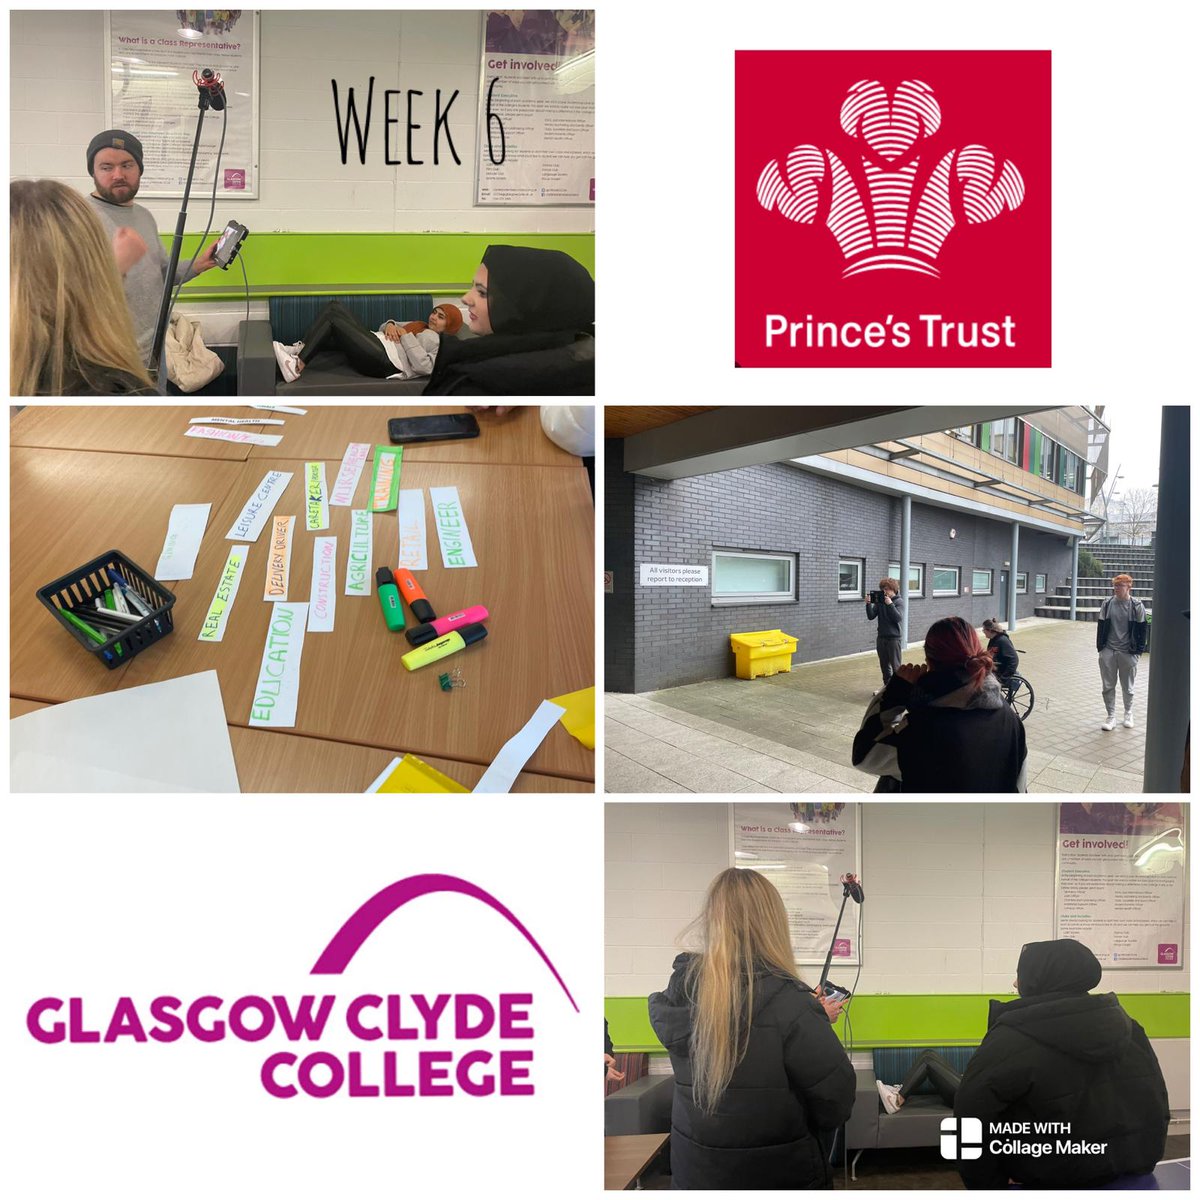 Team 69 Langside Campus Week 6 Flim making #Filmmaking our young people continue to develop new skills #Digital weekly Barista as normal #barista Prince's Trust #princestrust @Glasgow_Clyde